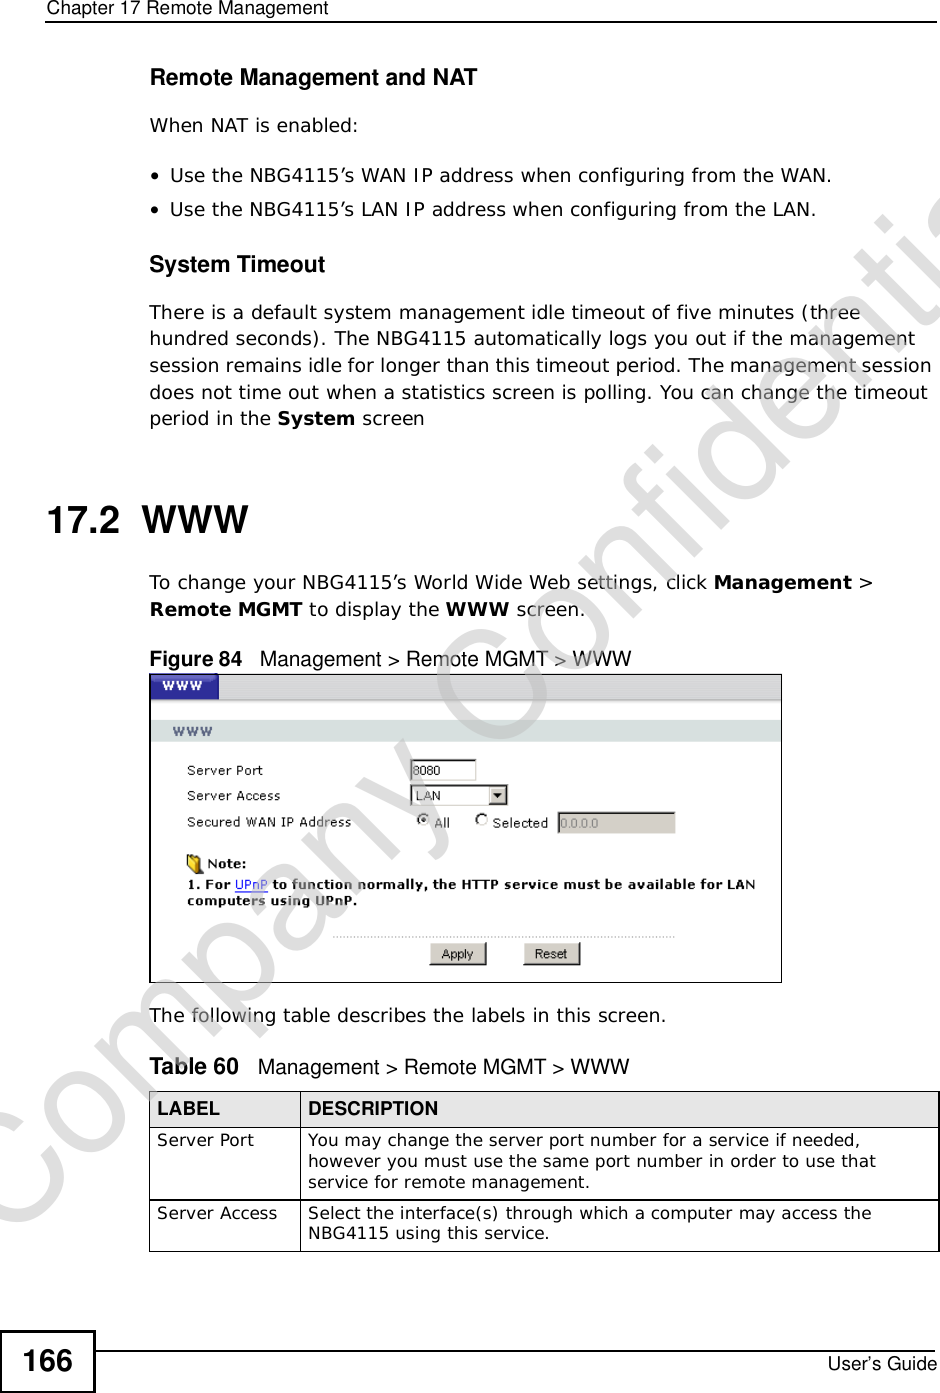 Chapter 17Remote ManagementUser’s Guide166Remote Management and NATWhen NAT is enabled:•Use the NBG4115’s WAN IP address when configuring from the WAN. •Use the NBG4115’s LAN IP address when configuring from the LAN.System TimeoutThere is a default system management idle timeout of five minutes (three hundred seconds). The NBG4115 automatically logs you out if the management session remains idle for longer than this timeout period. The management session does not time out when a statistics screen is polling. You can change the timeout period in the System screen17.2  WWWTo change your NBG4115’s World Wide Web settings, click Management &gt; Remote MGMT to display the WWW screen.Figure 84   Management &gt; Remote MGMT &gt; WWW The following table describes the labels in this screen.Table 60   Management &gt; Remote MGMT &gt; WWWLABEL DESCRIPTIONServer Port You may change the server port number for a service if needed, however you must use the same port number in order to use that service for remote management.Server Access Select the interface(s) through which a computer may access the NBG4115 using this service.Company Confidential